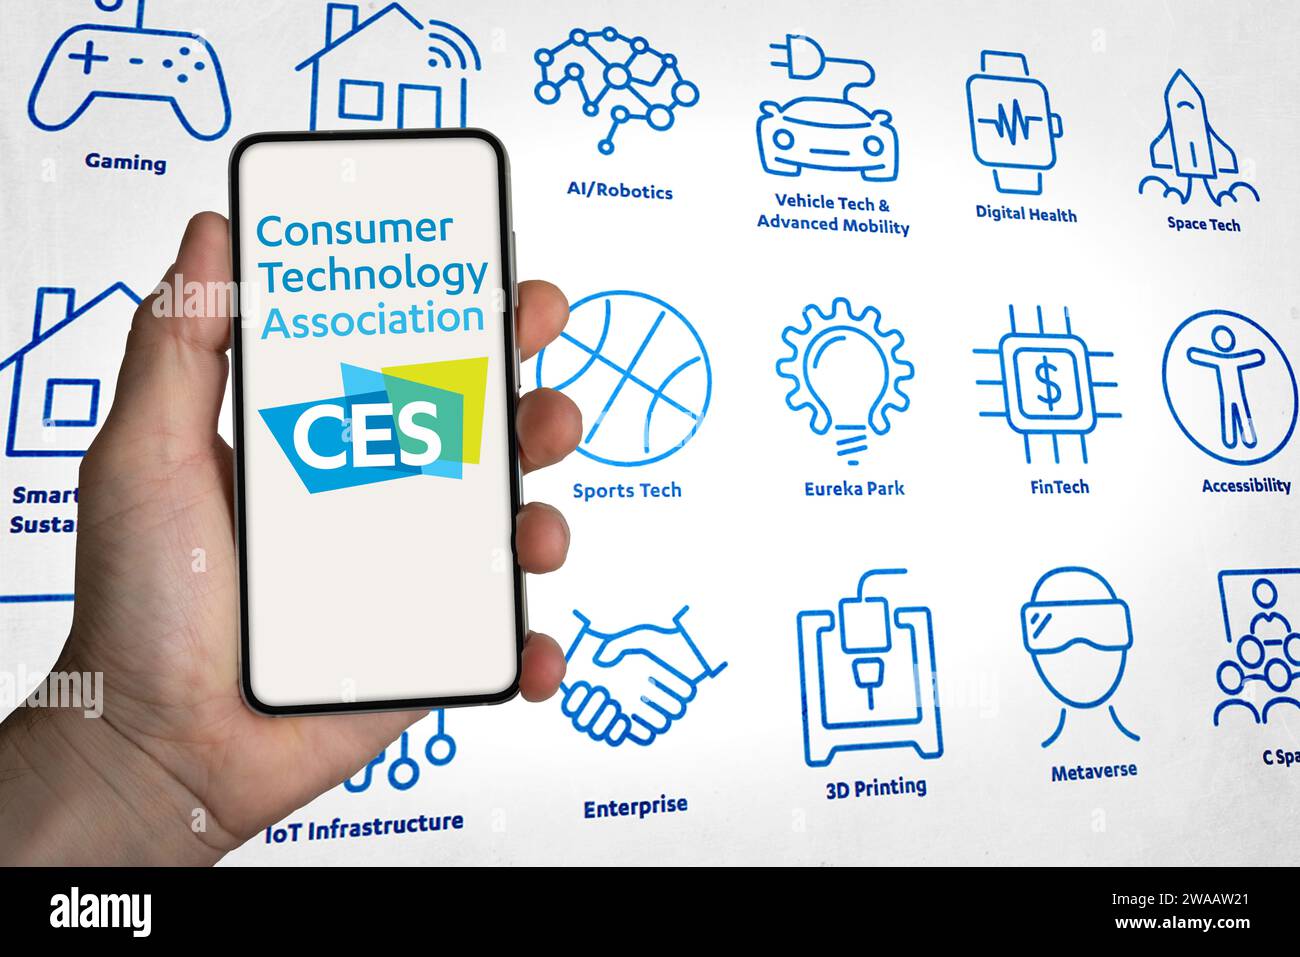 CES tech event in Las Vegas, USA - displayed on mobile device Stock Photo